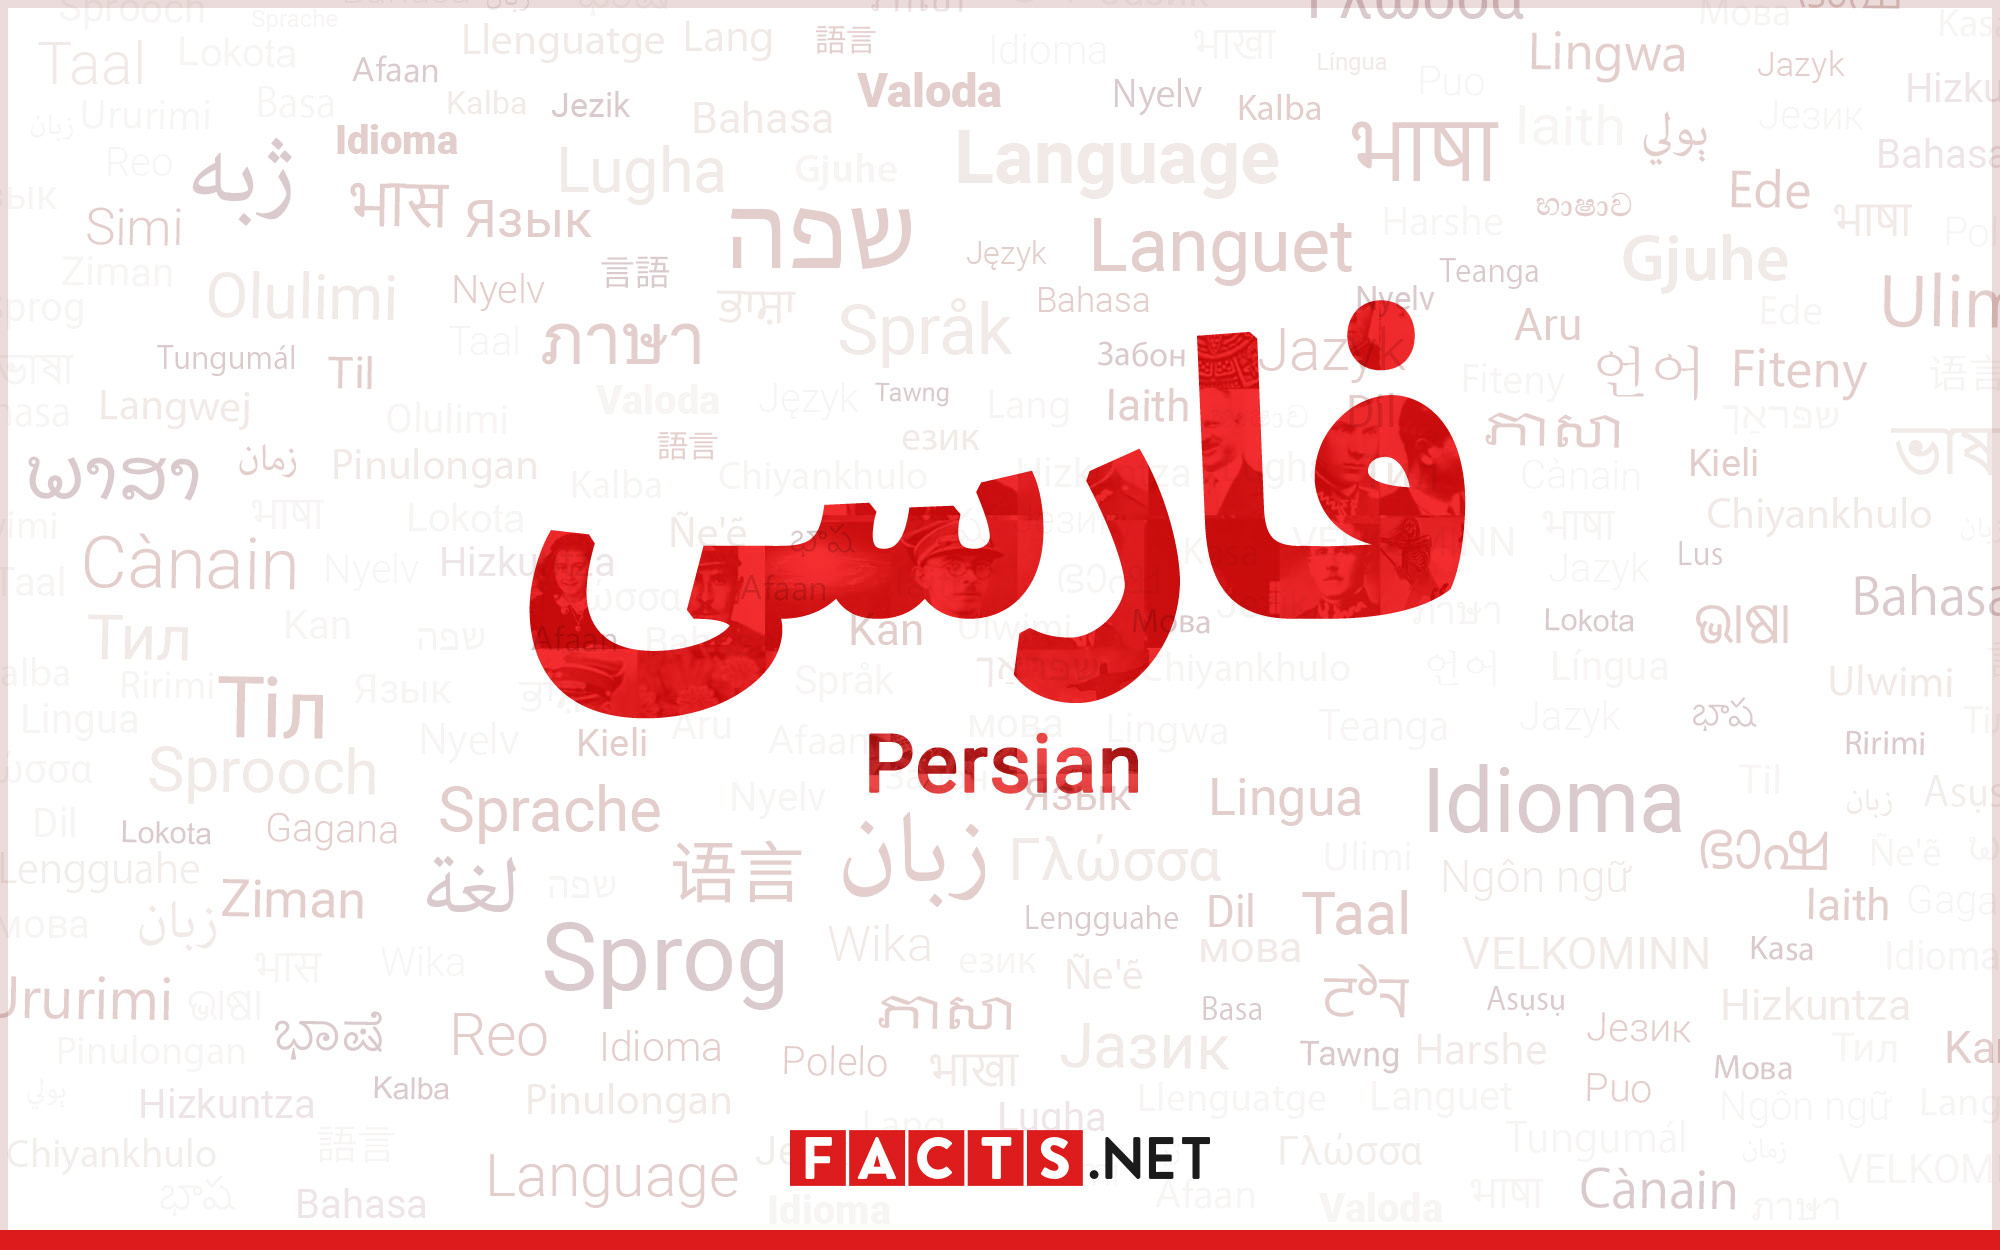 11-captivating-facts-about-persian-language